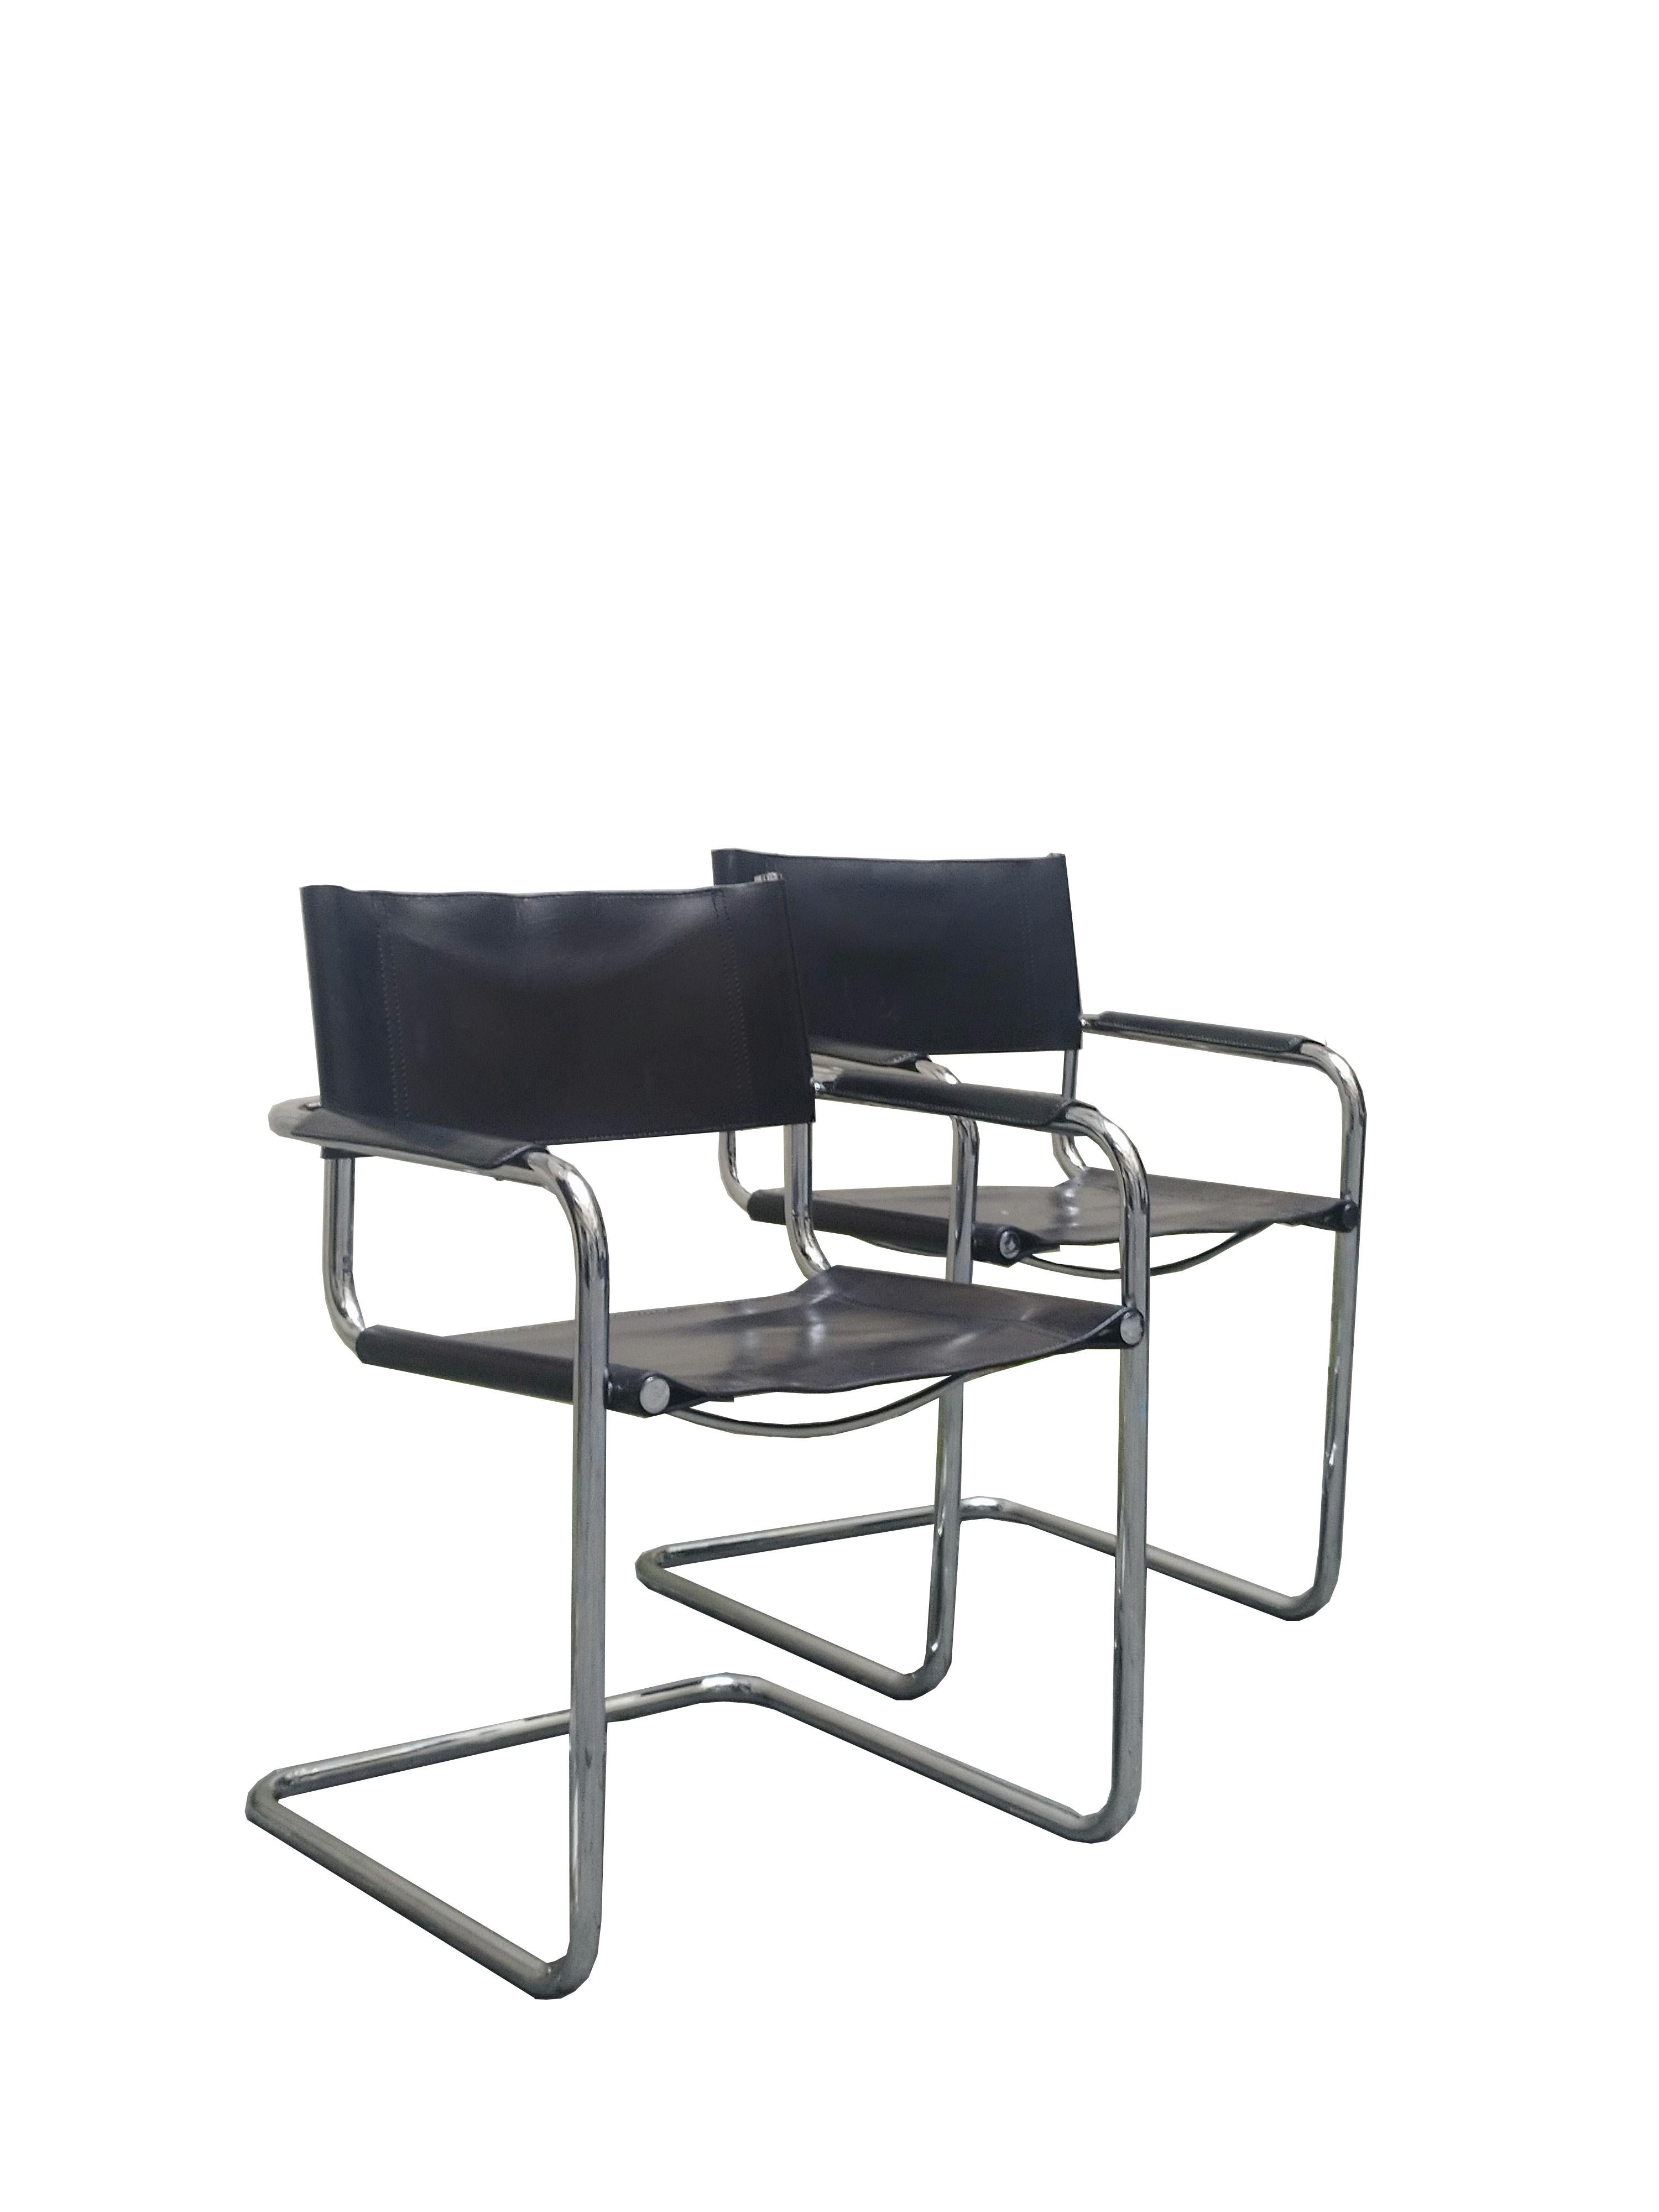 Iconic Bauhaus cantilevered armchairs of chrome tubular steel with black leather sling seat and back and black leather armrests in near pristine condition. Designed by Mart Stam in 1927, chairs of this style were the first cantilevered chairs in